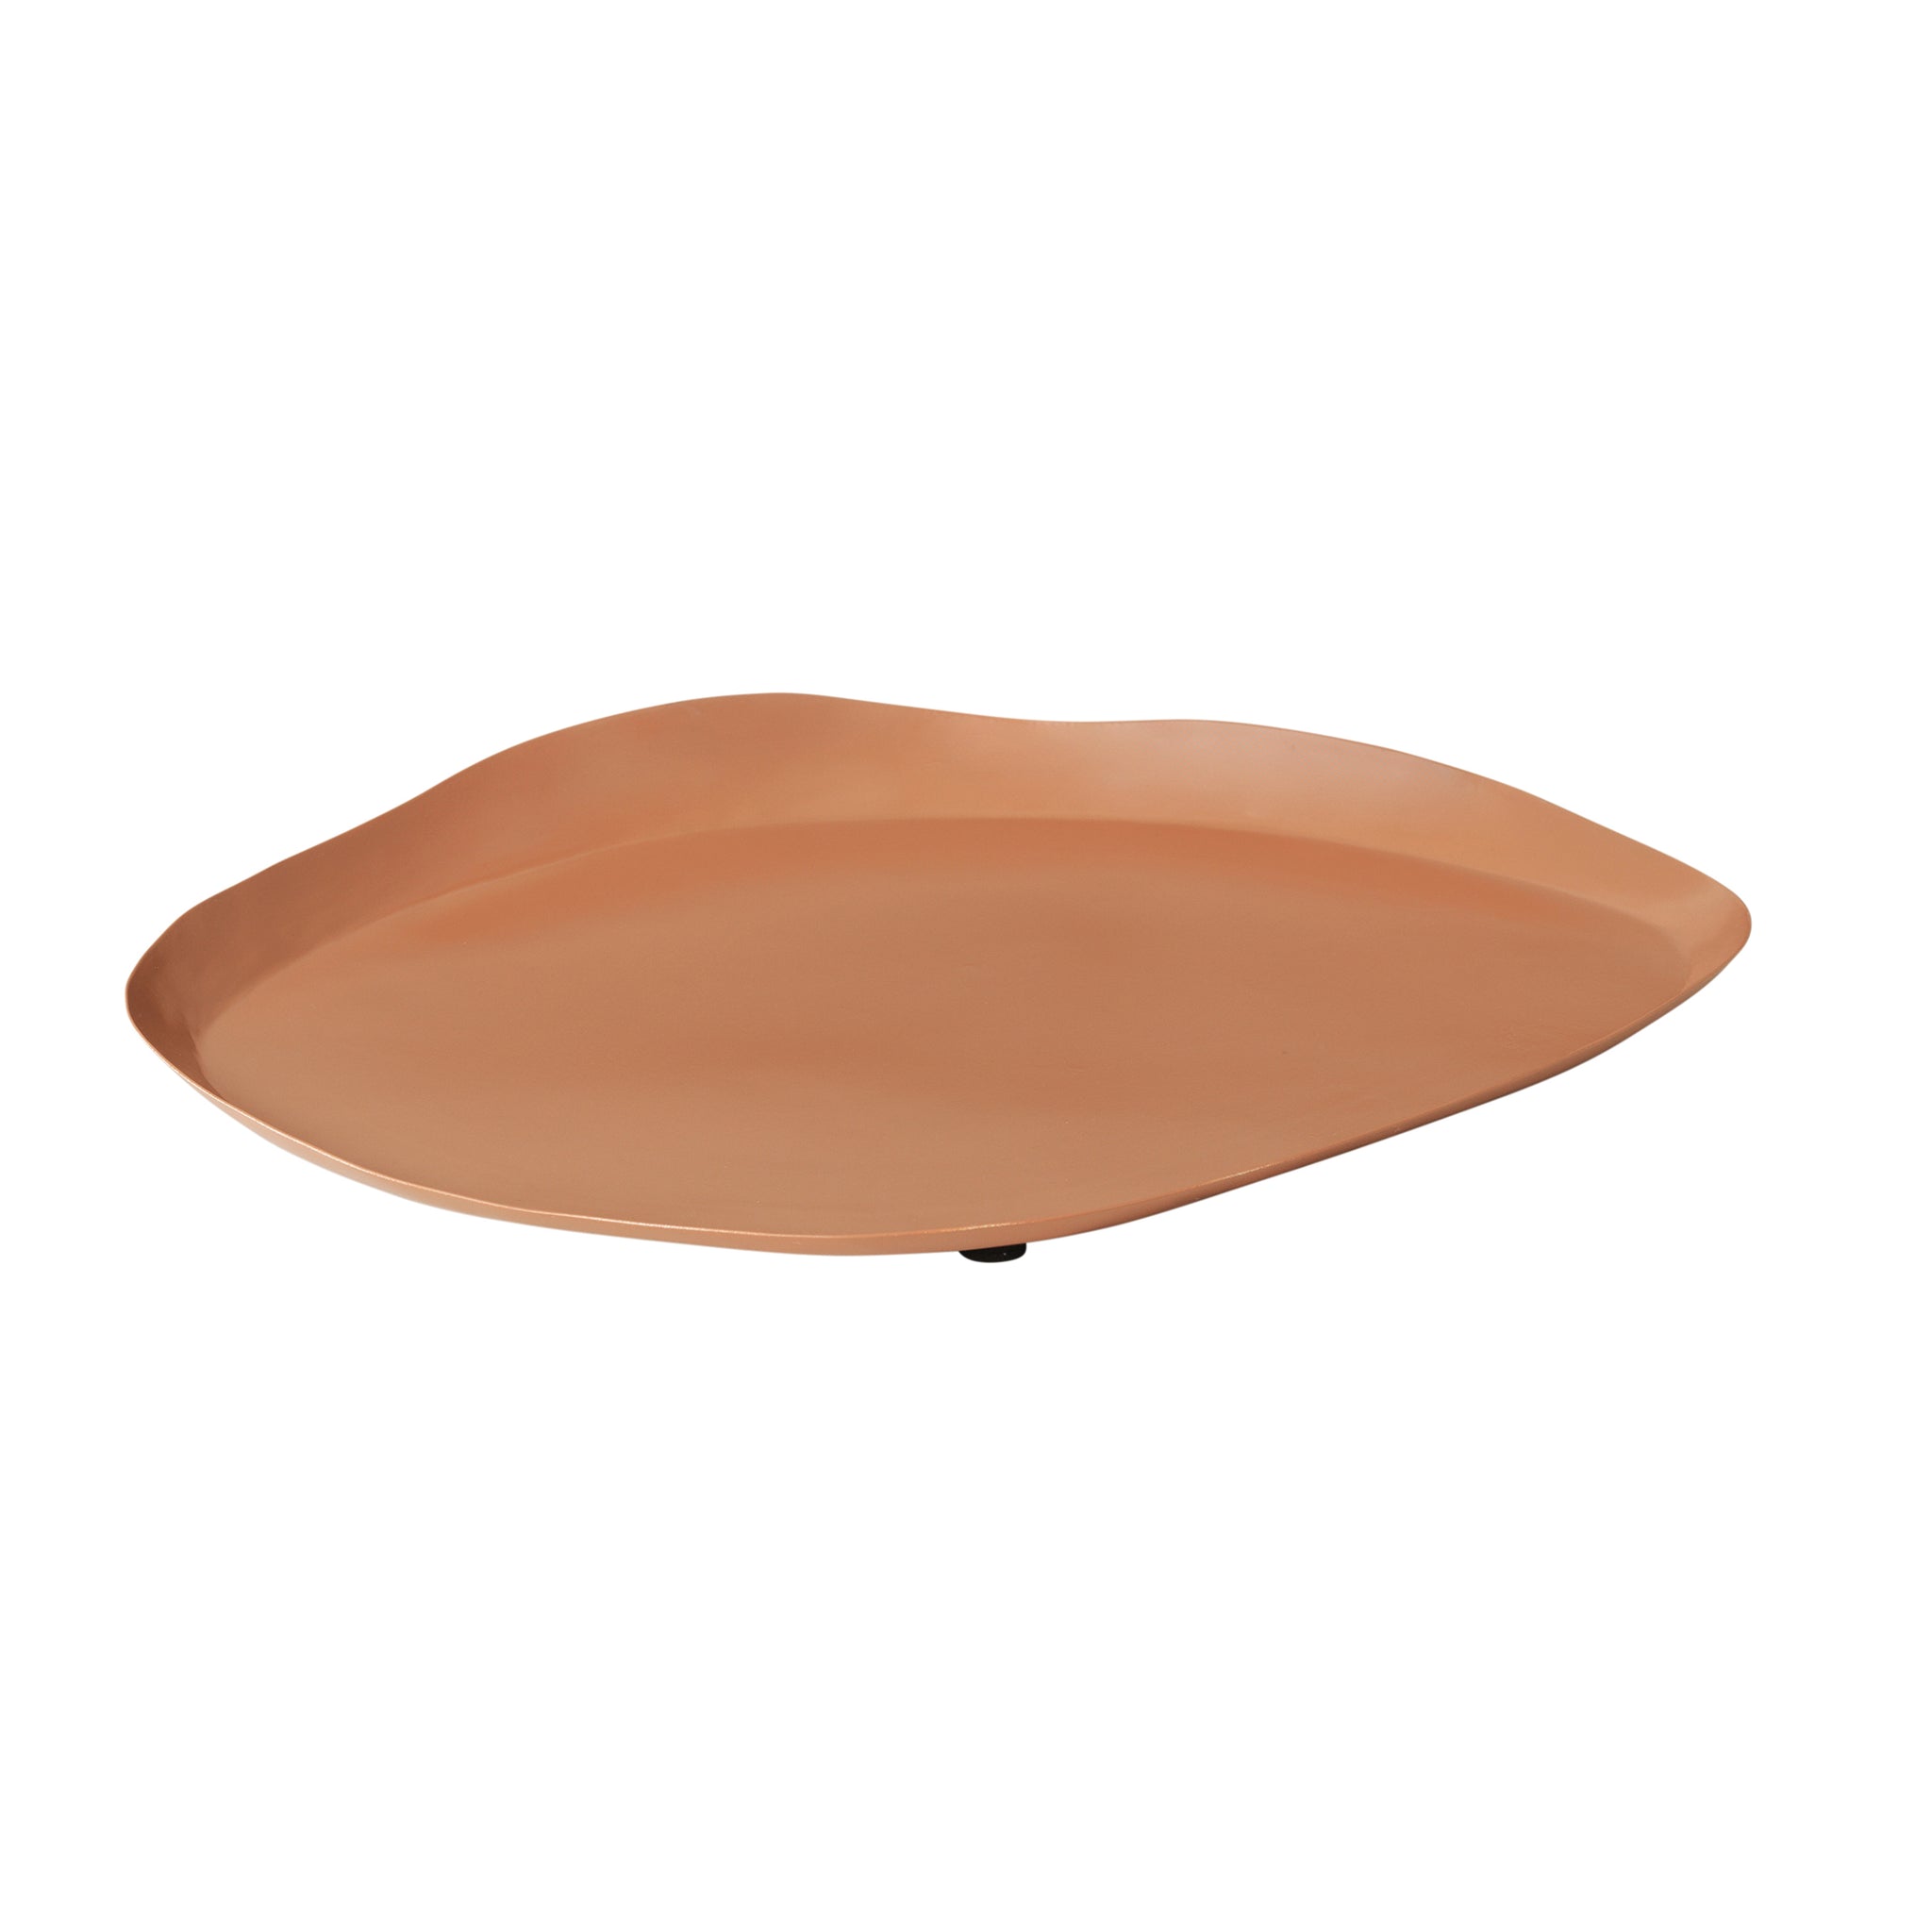 Iron Tray - Toasted Nut Beige - Five And Dime